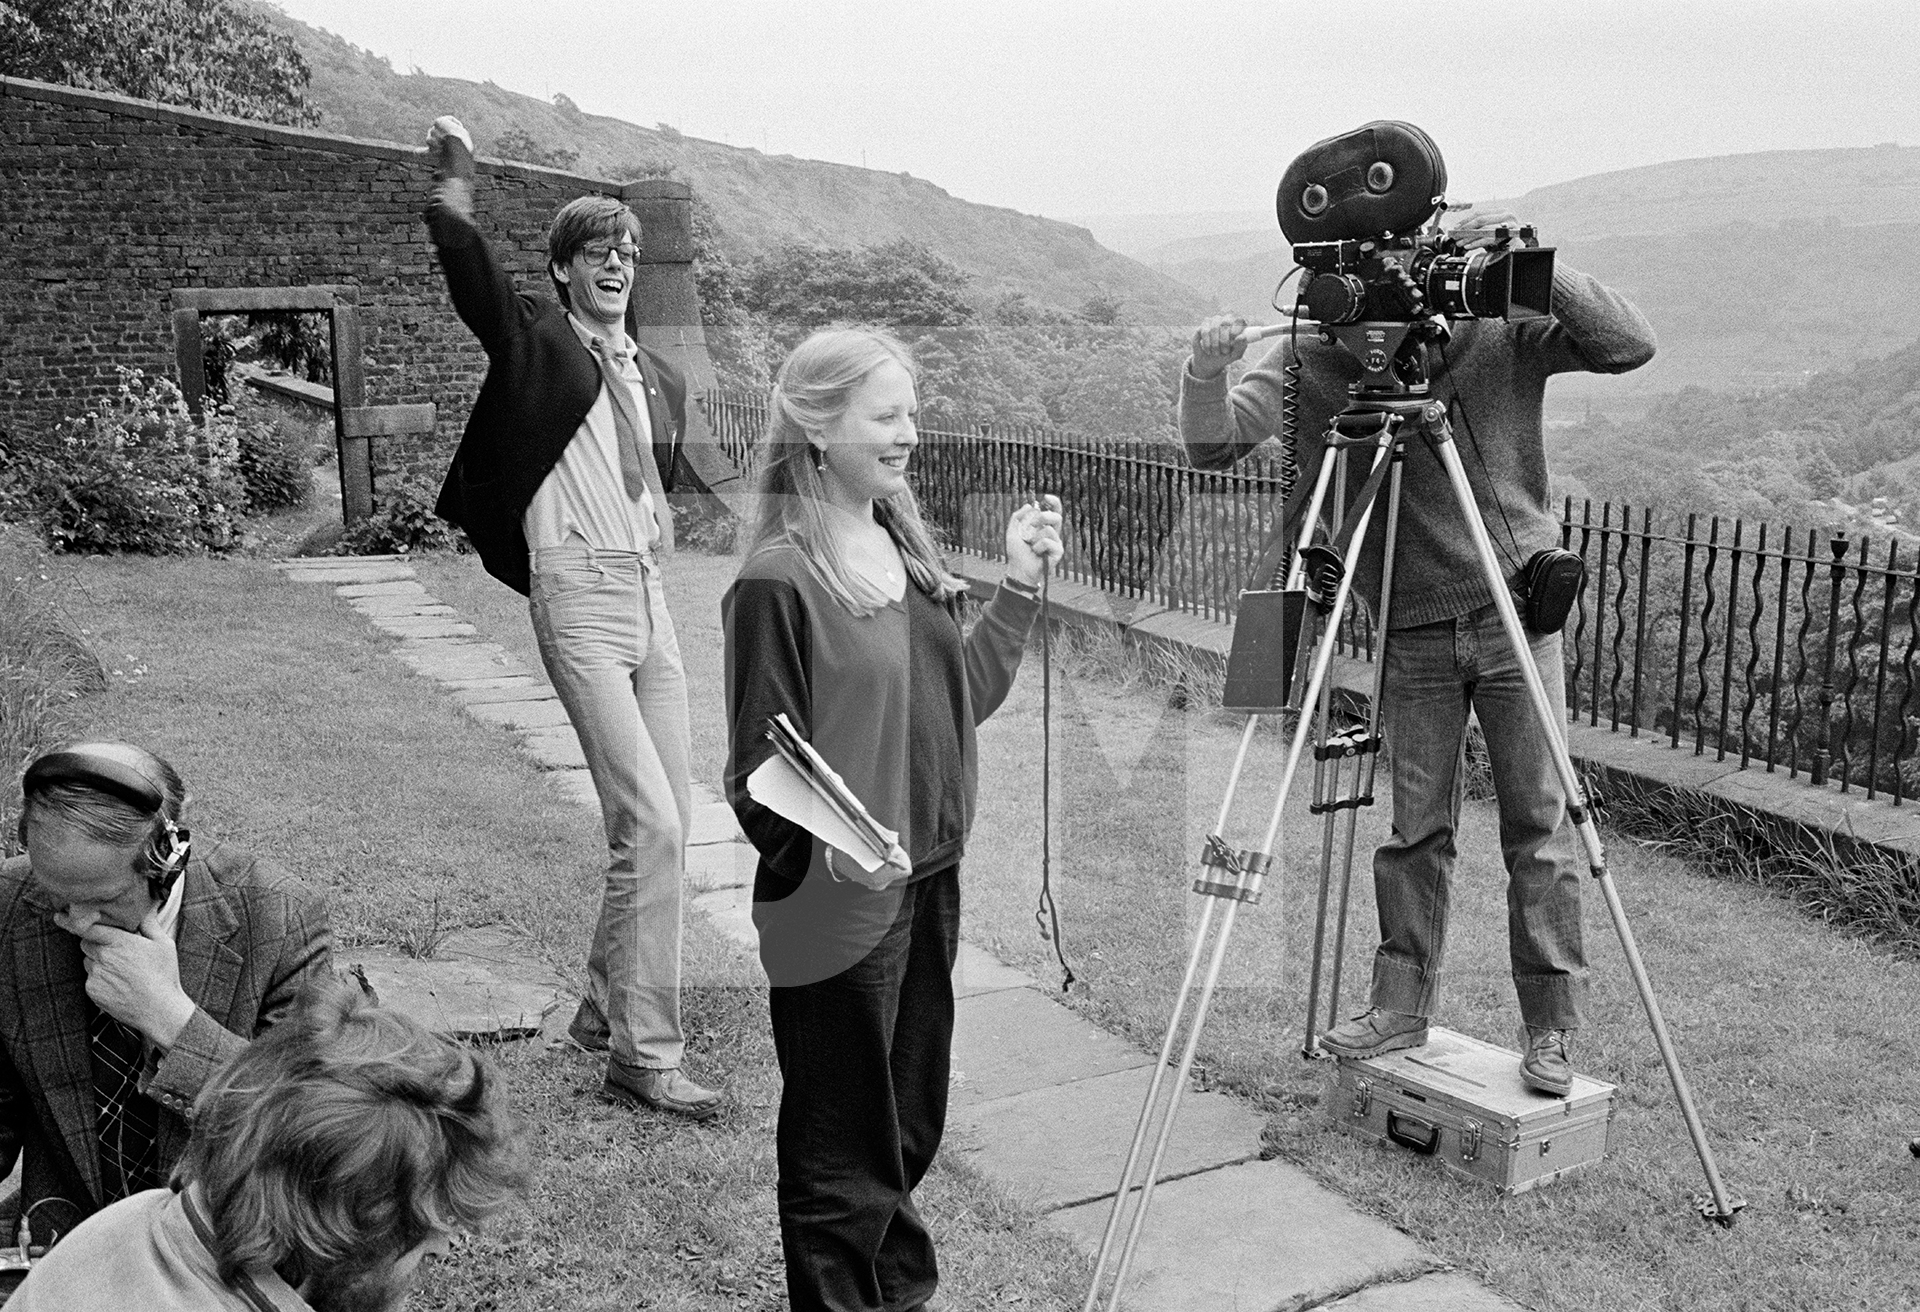 Filming on location, David Liddiment directs, Toni (Antonia) Ackland, PA with stopwatch, The Arvon Foundation, Lumb Bank, Heltonstall. June 1979 by Daniel Meadows